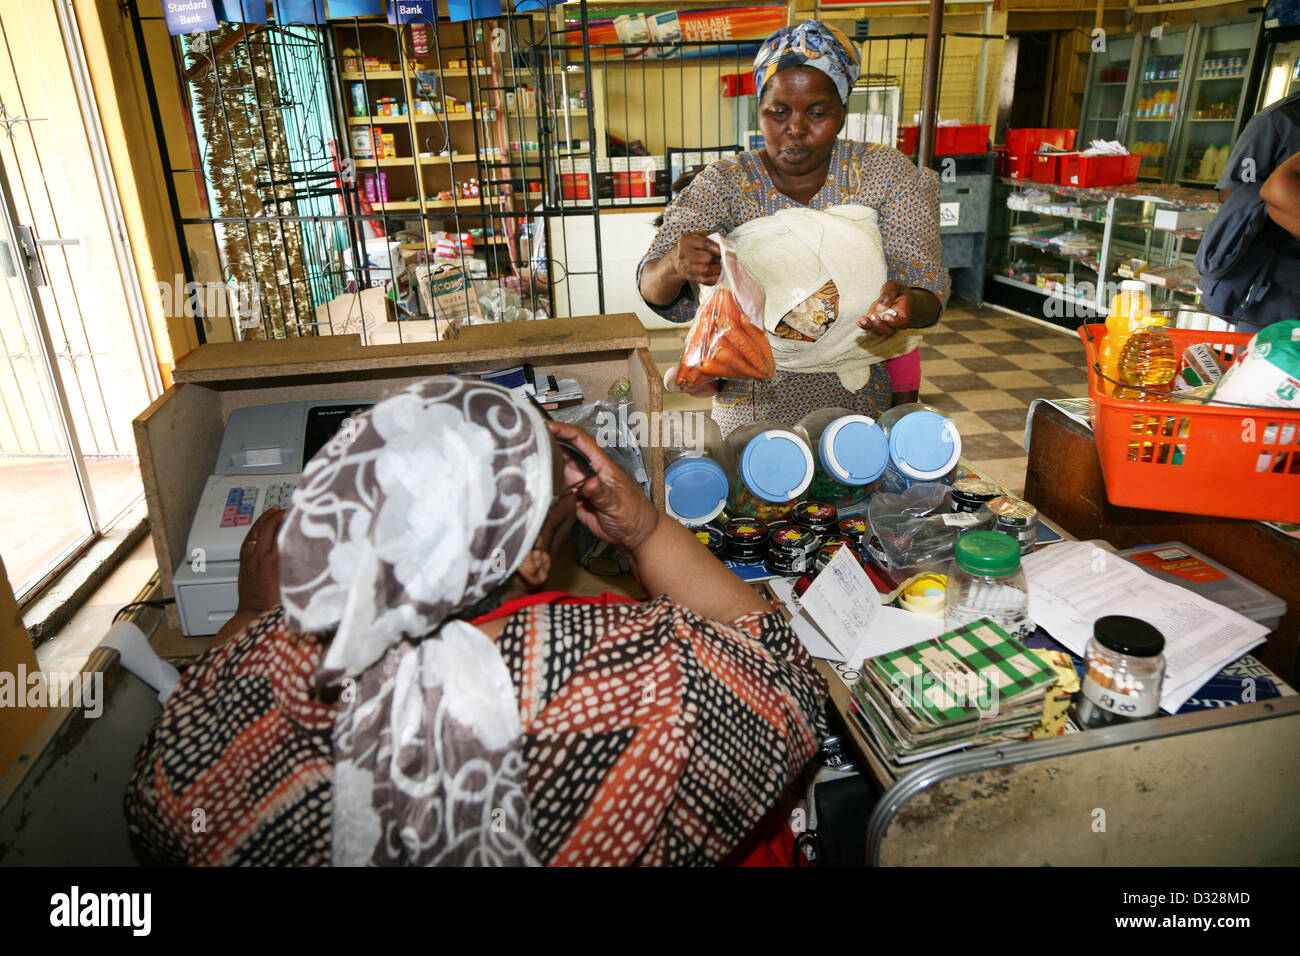 African customers purchase consumer items at a small bussiness in Hamburg, South Africa Stock Photo